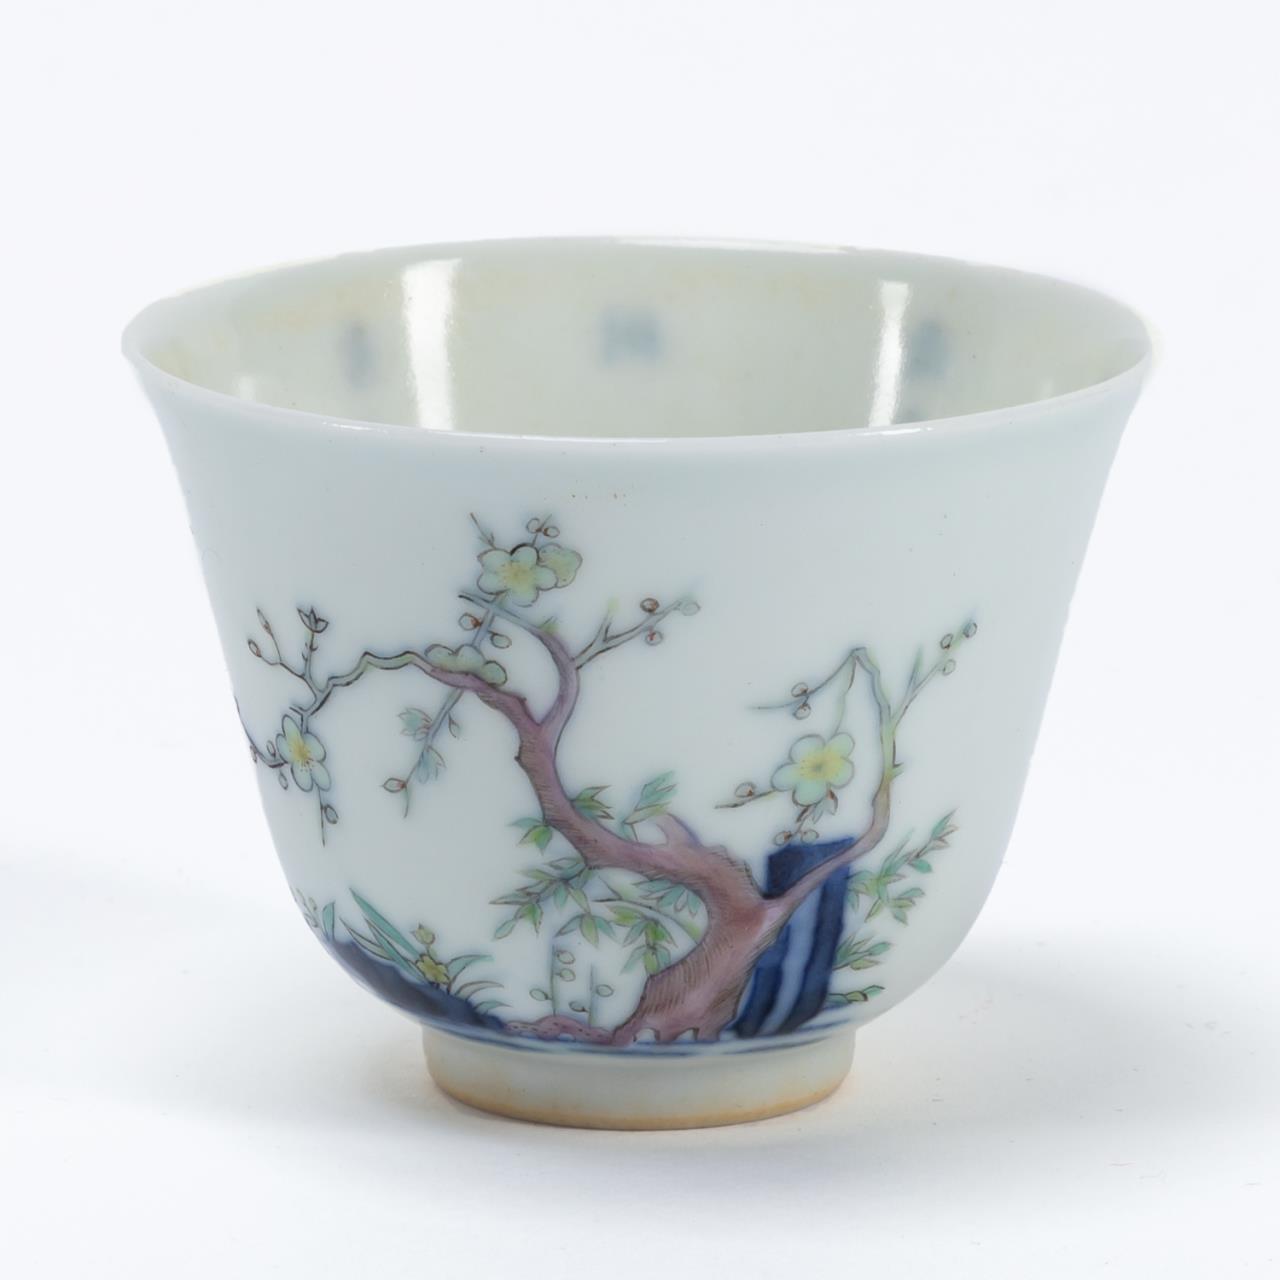 SMALL CHINESE PORCELAIN CUP WITH 35aa3d